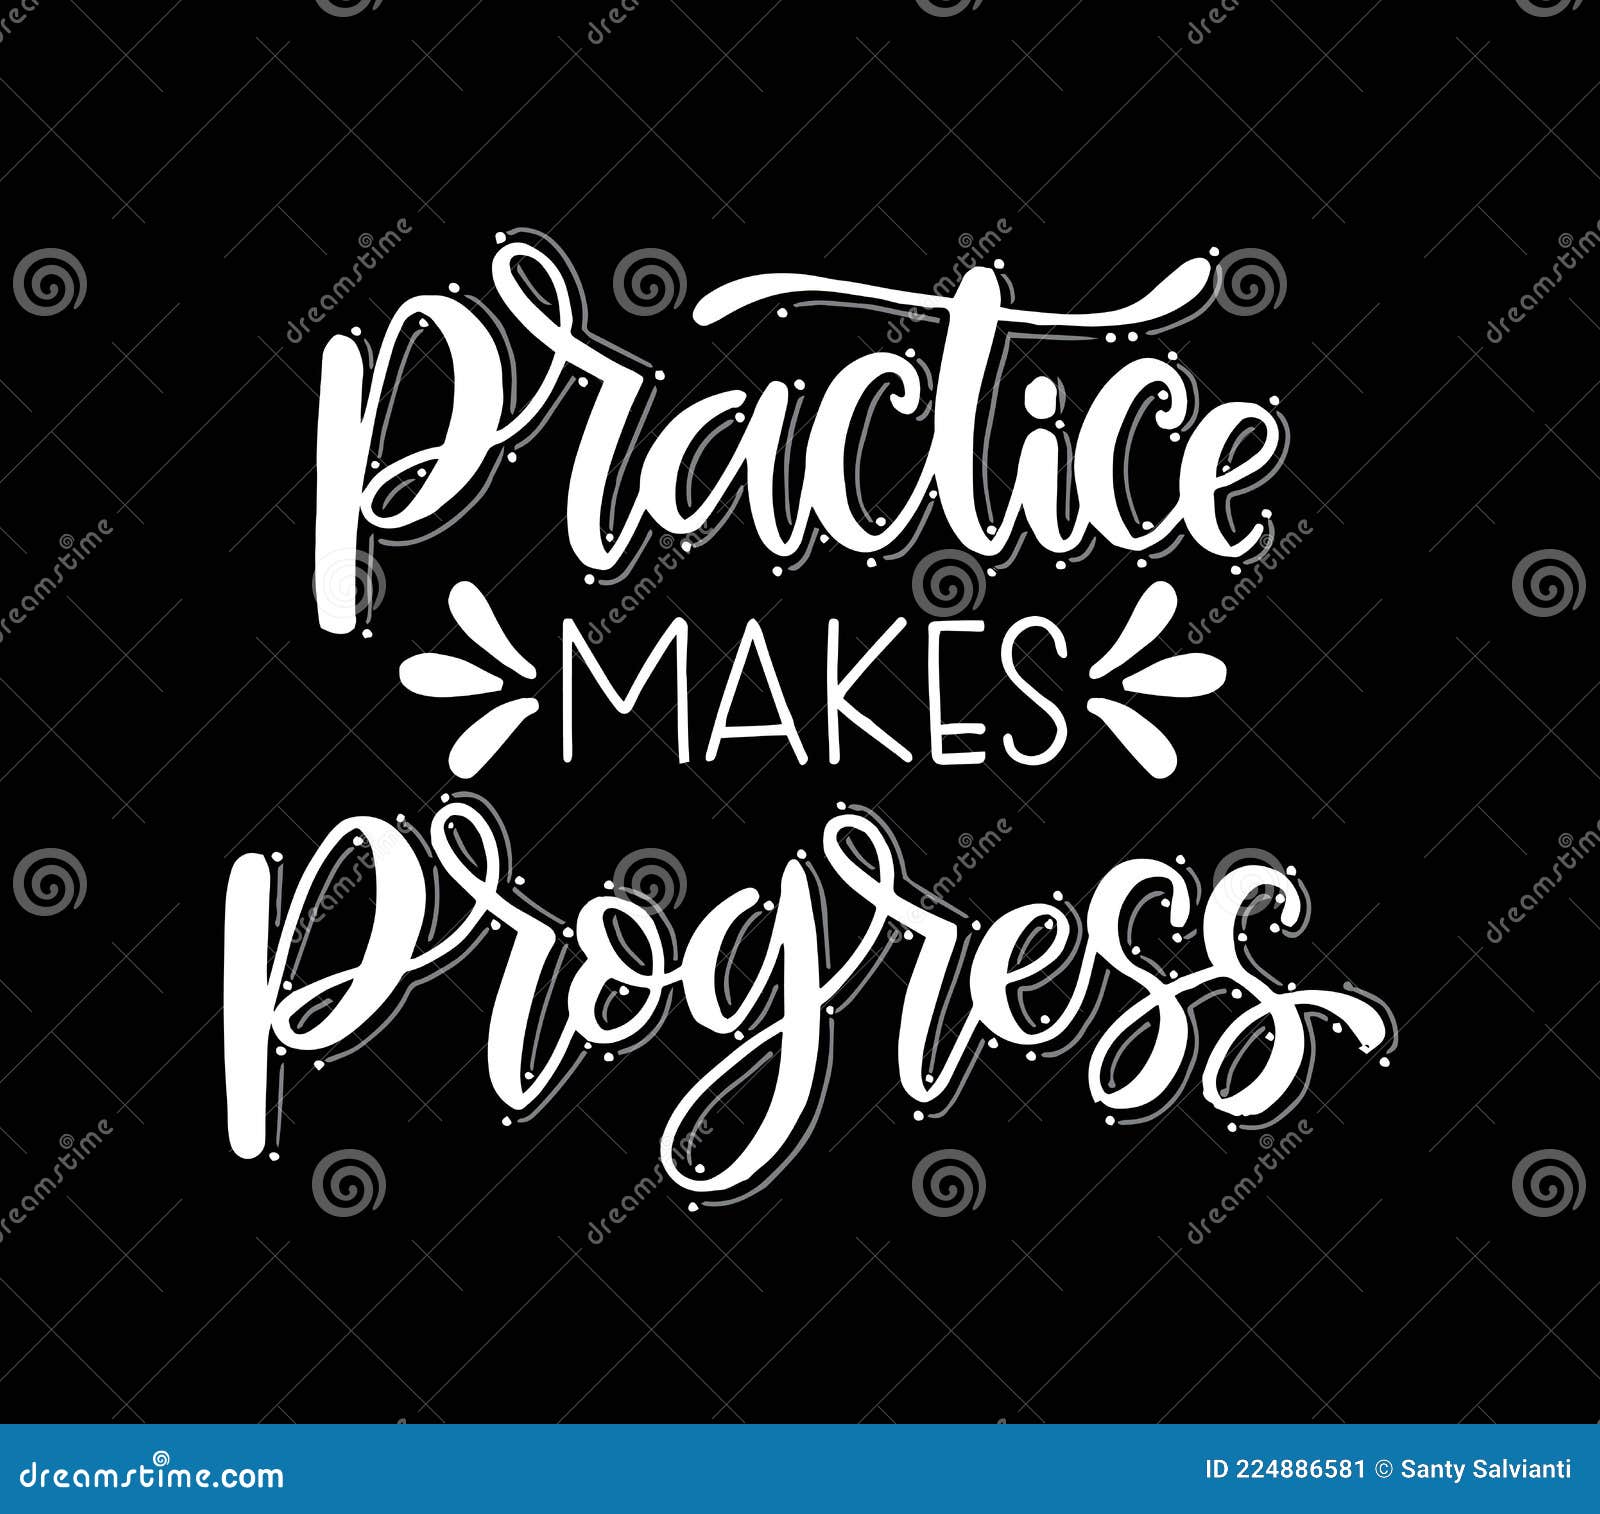 https://thumbs.dreamstime.com/z/practice-makes-progress-hand-drawn-typography-poster-t-shirt-lettered-calligraphic-design-inspirational-vector-lettering-224886581.jpg